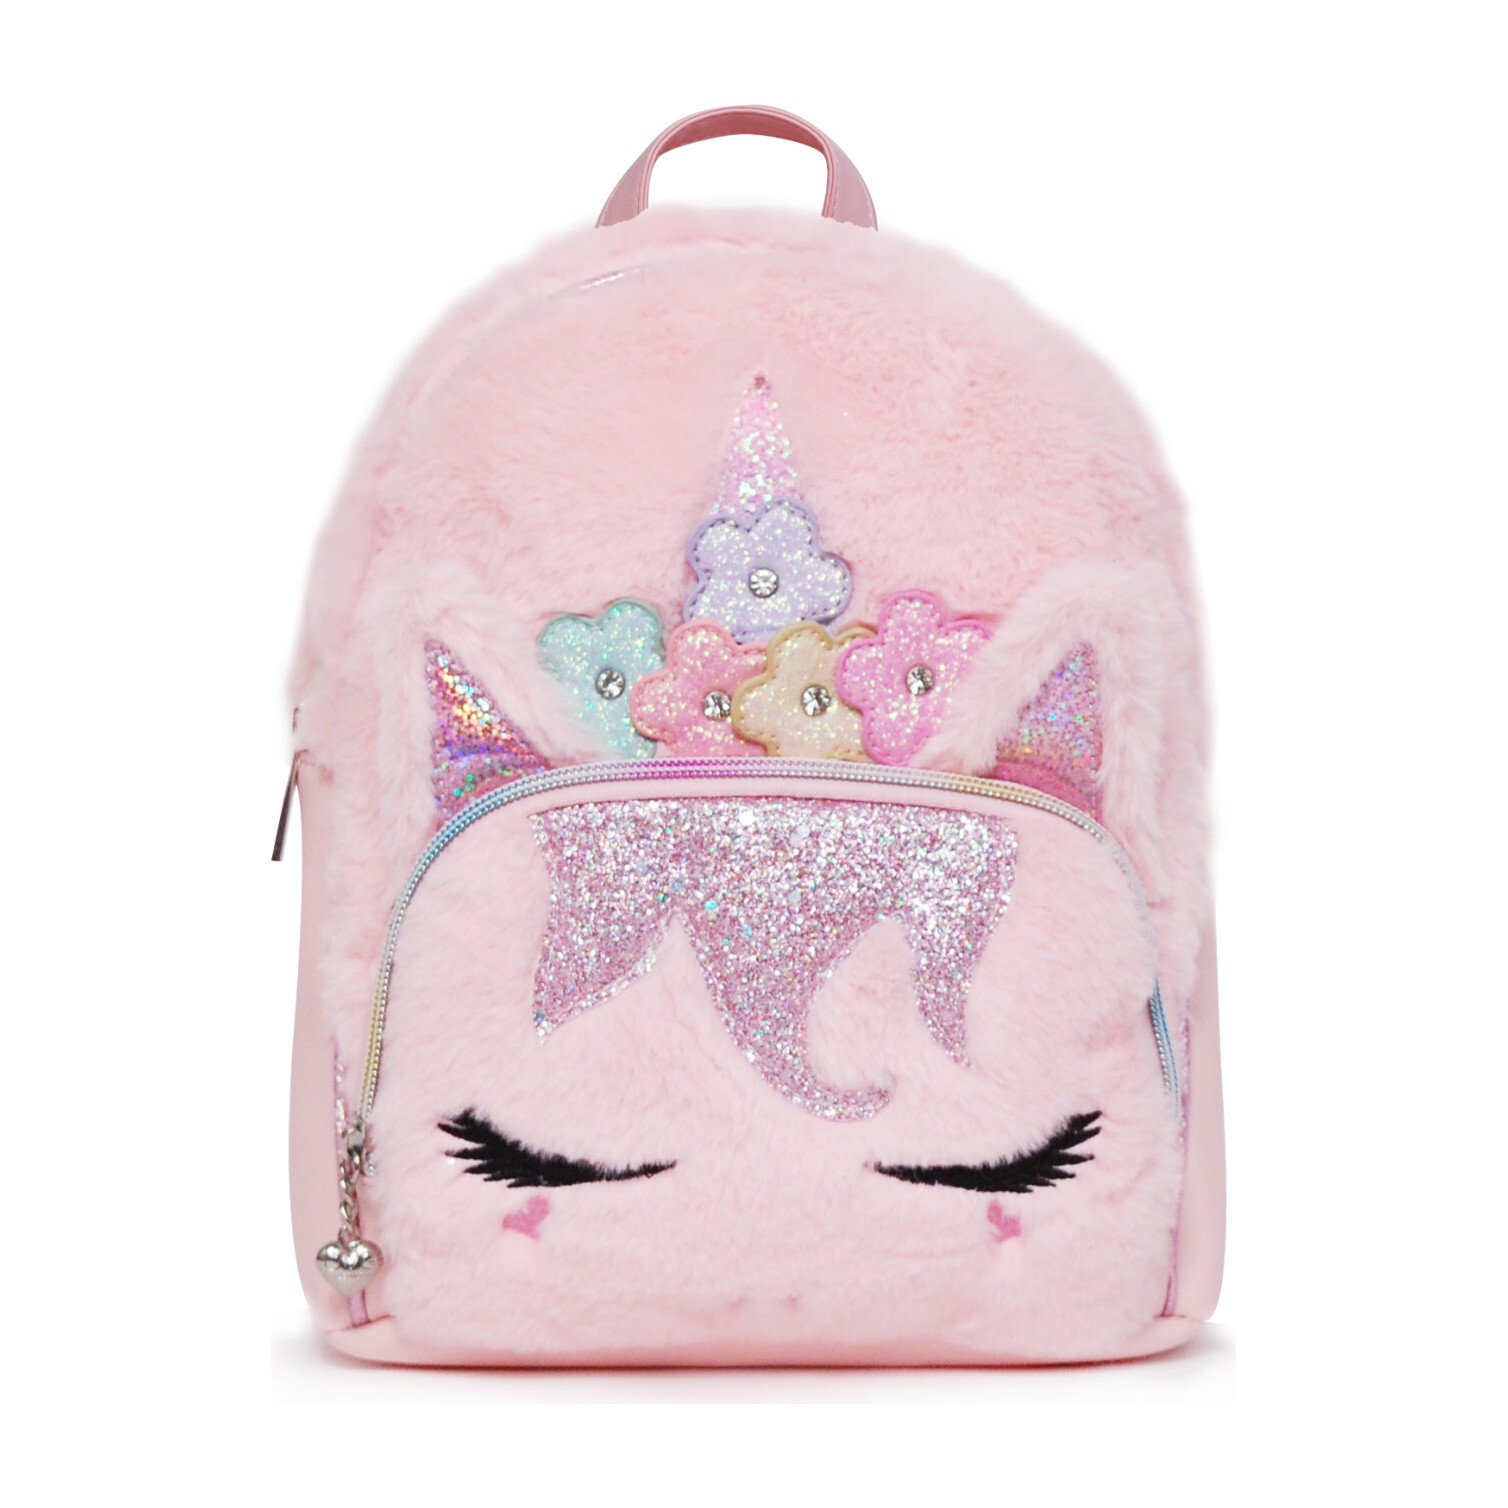 Miss Gwen Unicorn Plush Backpack, Pink - Kids Girl Accessories Bags ...